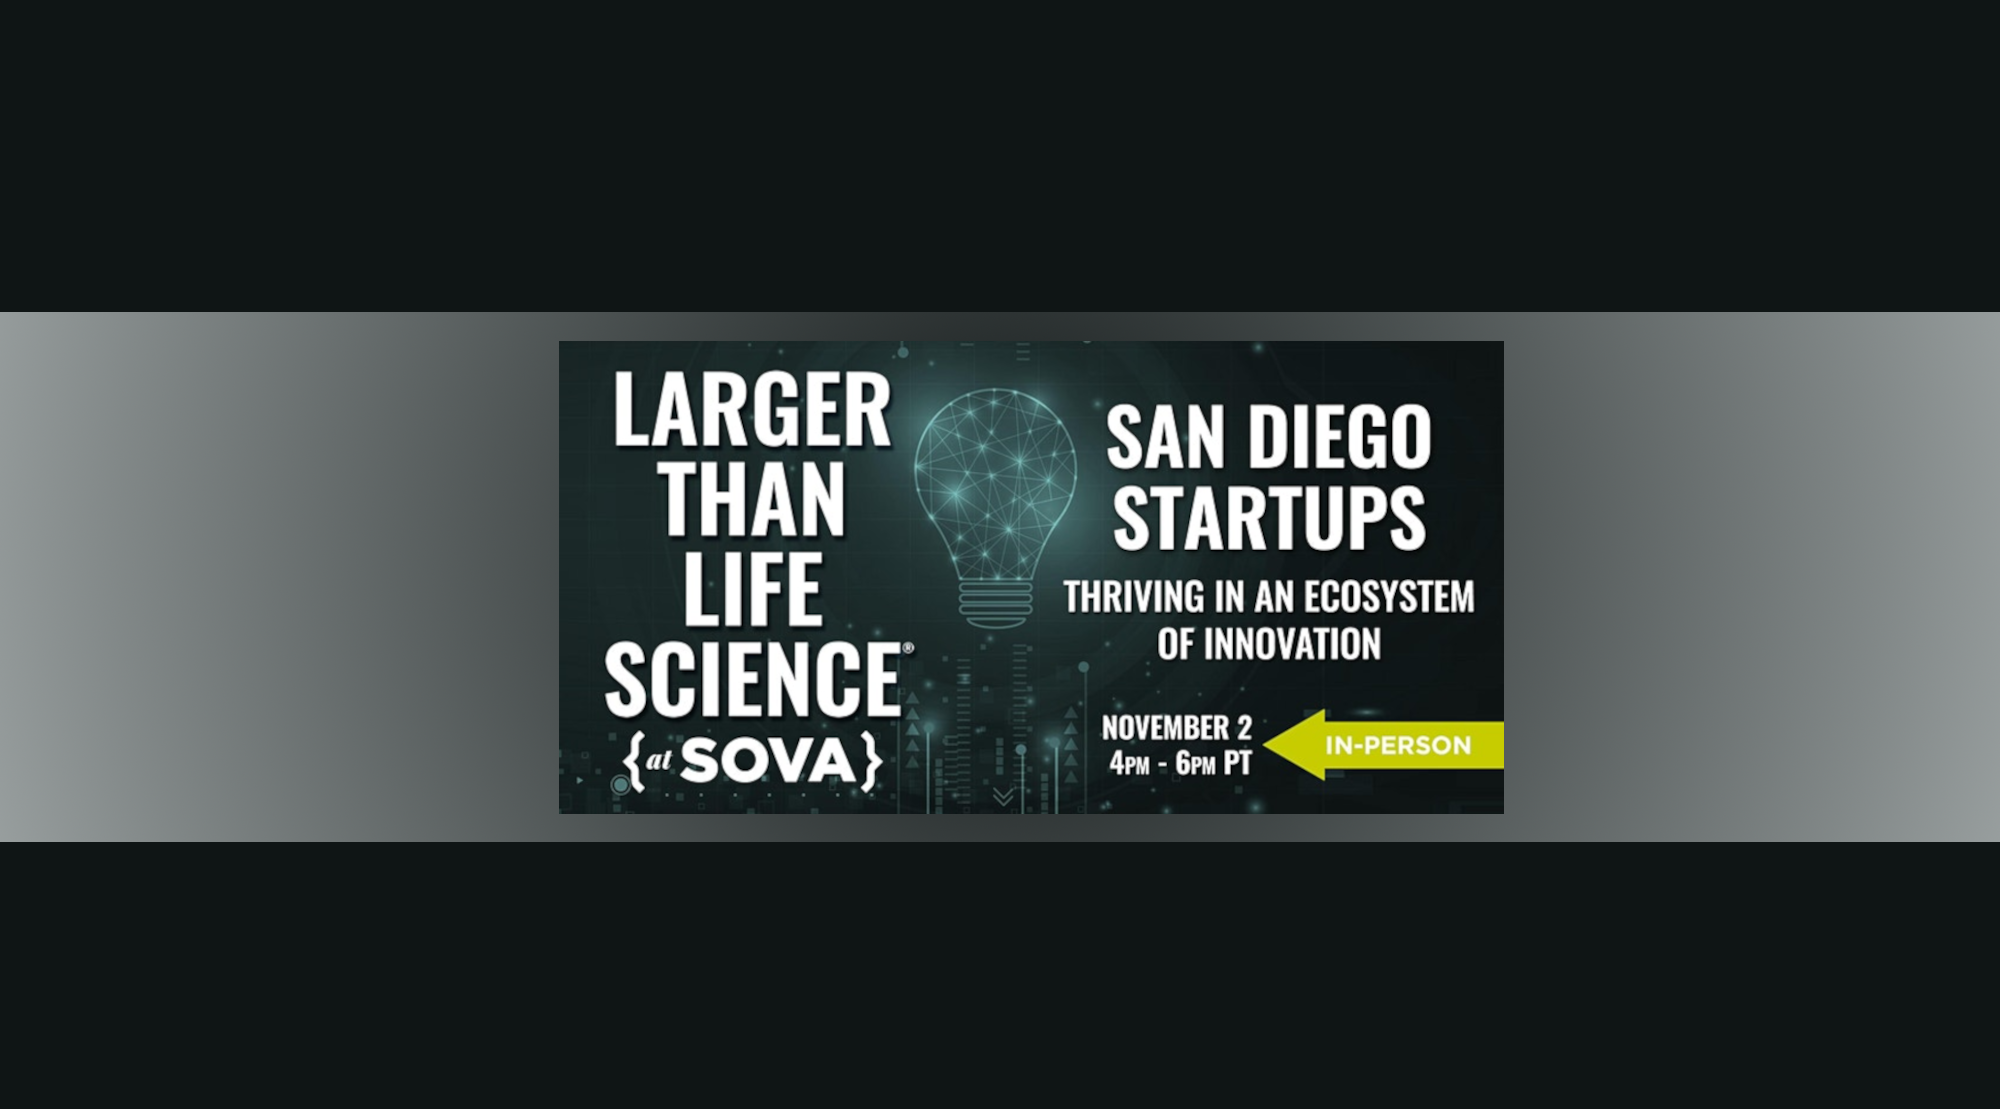 LARGER THAN LIFE SCIENCE | San Diego Startups